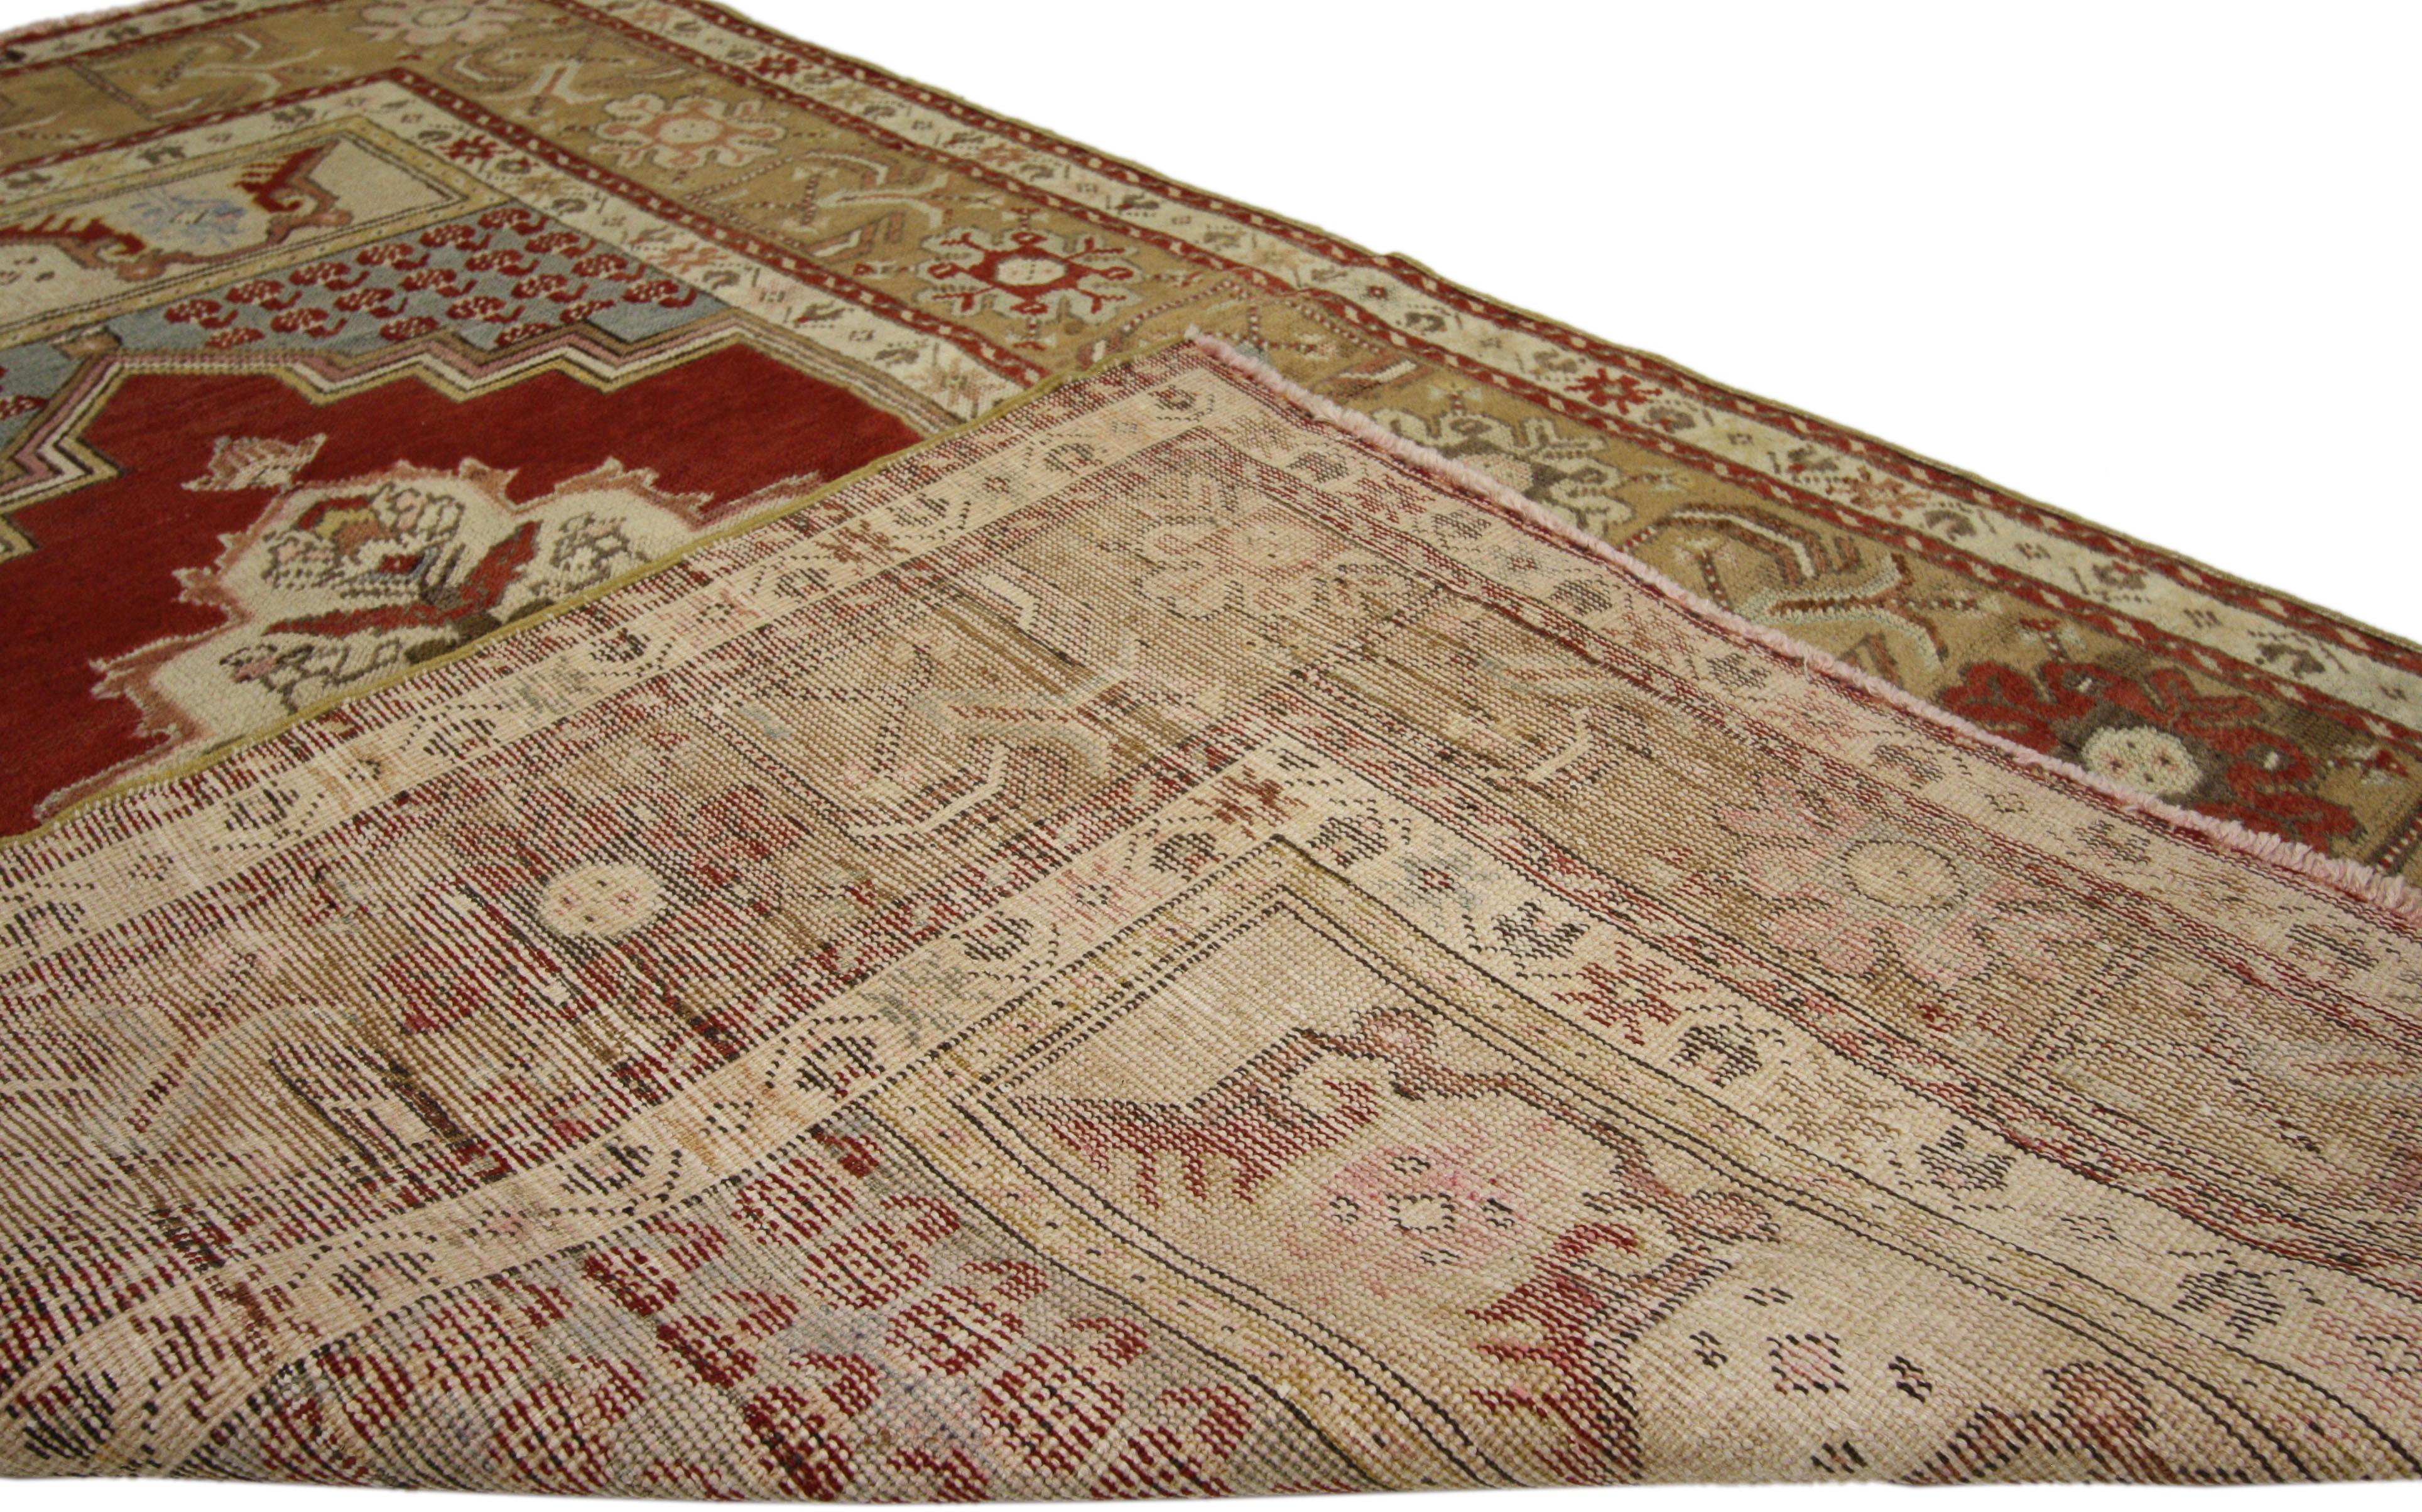 Vintage Turkish Oushak Accent Rug, Entry or Foyer Rug with Manor House Style In Good Condition For Sale In Dallas, TX